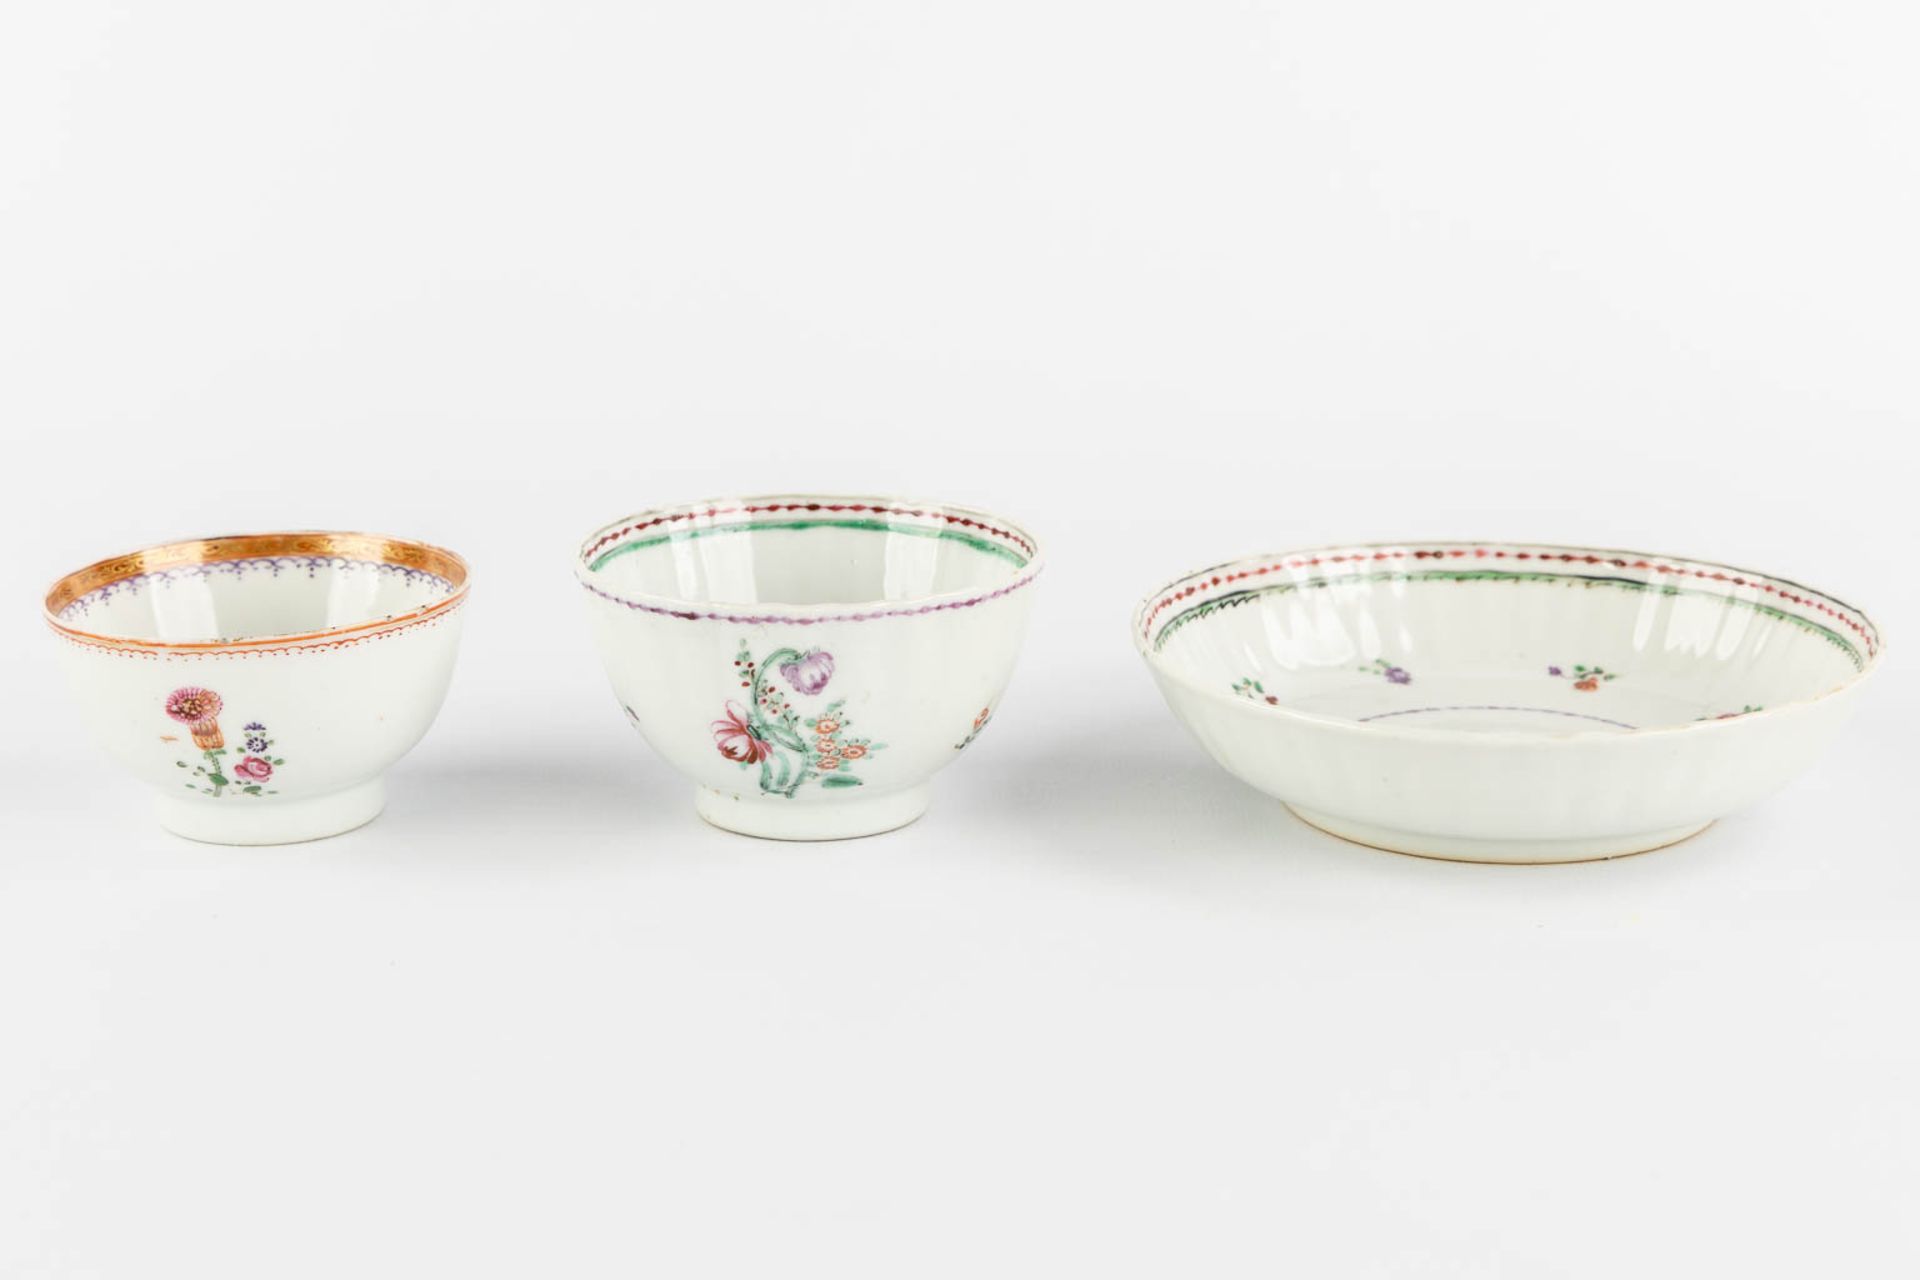 Ten Chinese Famille Rose plates and cups, flower decor. (D:23,5 cm) - Image 11 of 13